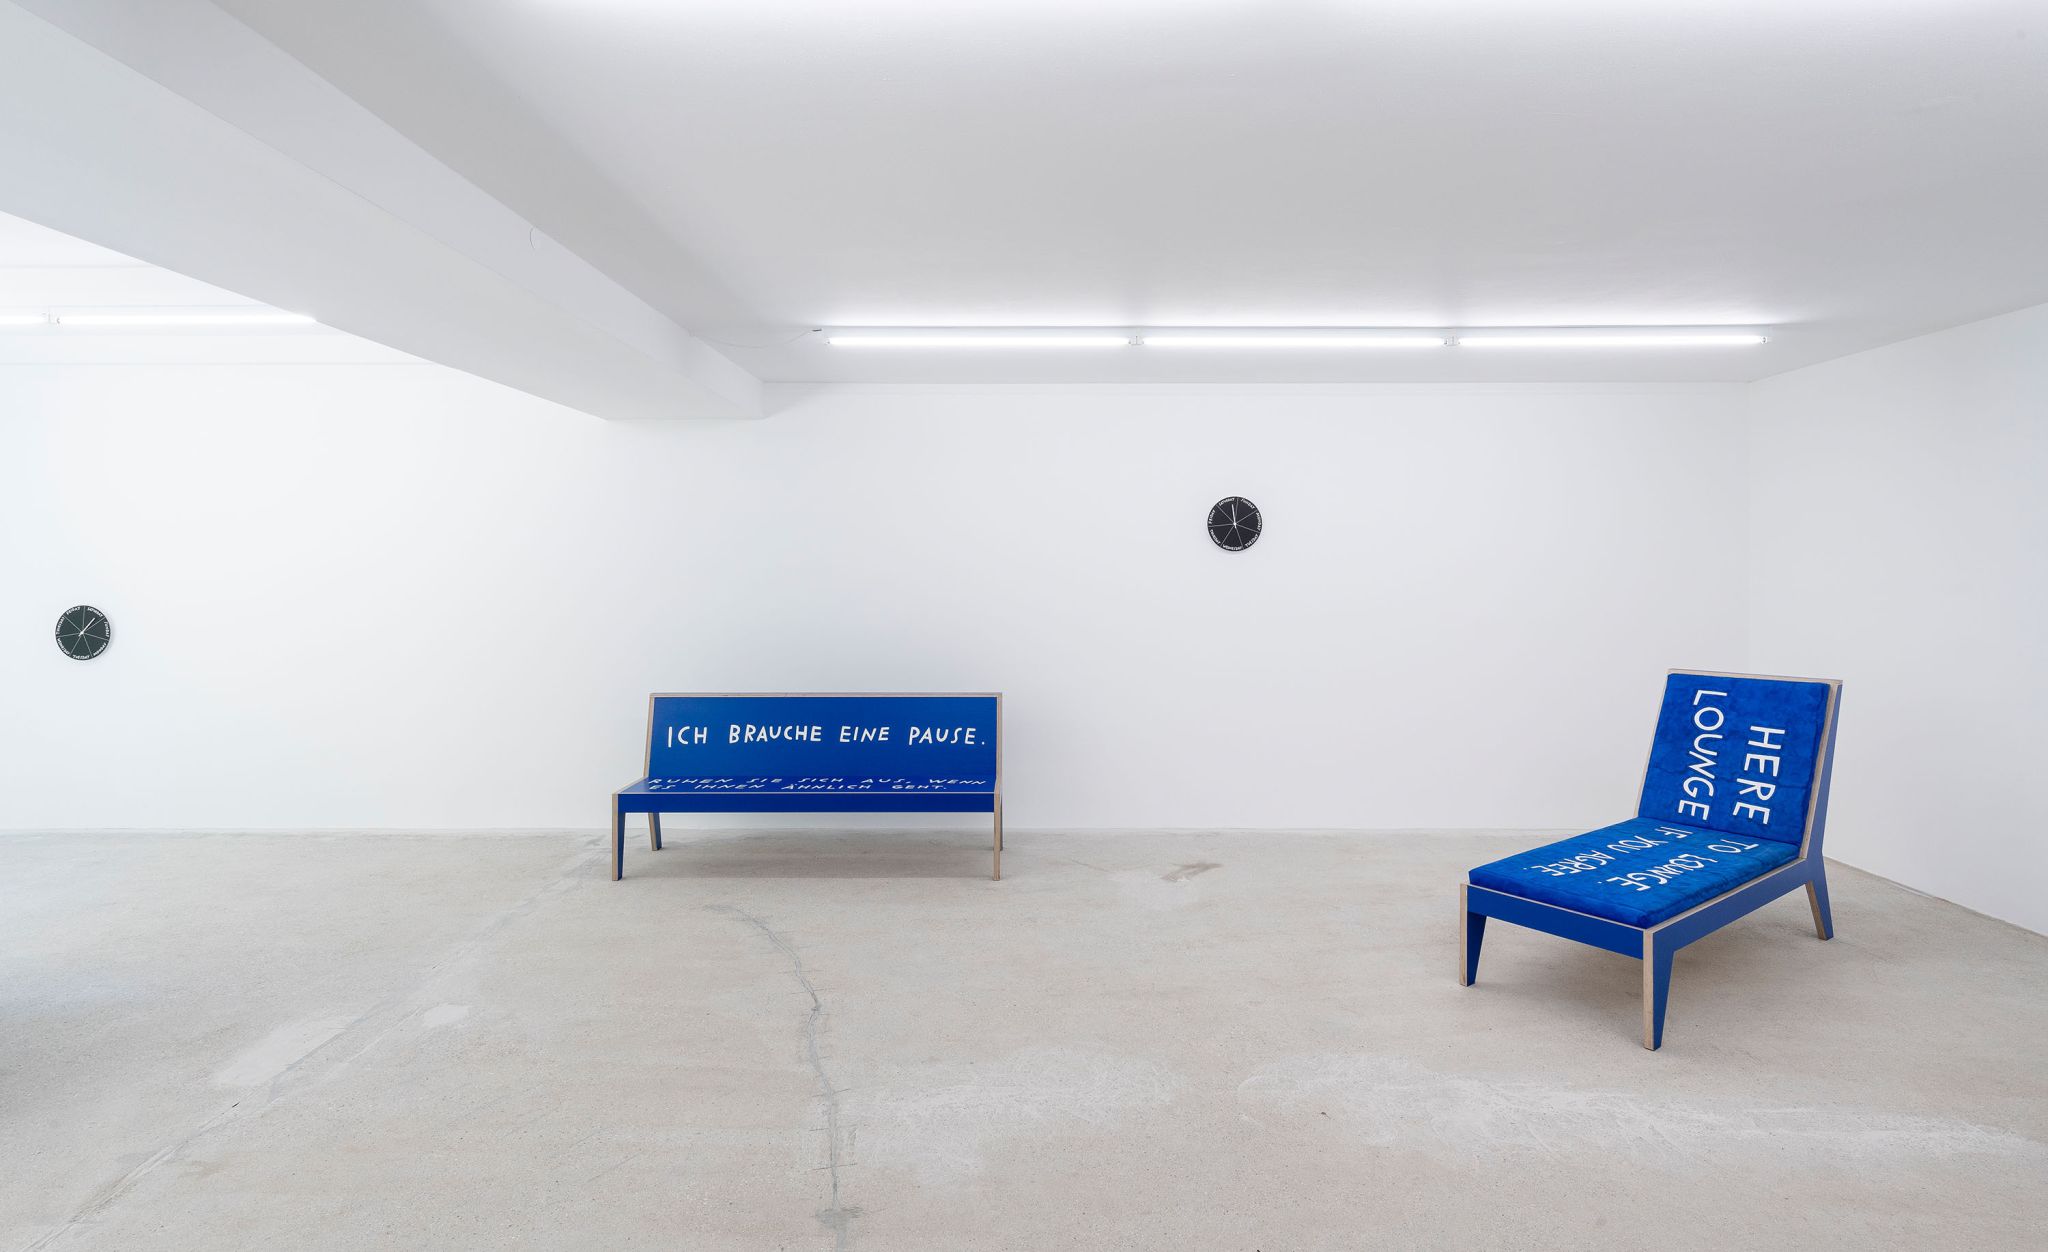 Finnegan Shannon, <em>Slower,</em> Installation view, Deborah Schamoni, 2022, Image desription: A blue bench and a blue chaise lounge in an exhibition room. Both have text in white letters on them, one in German, the other in English language. Both texts invite the viewer to rest. Two black clocks are hanging on the wall in different heights.